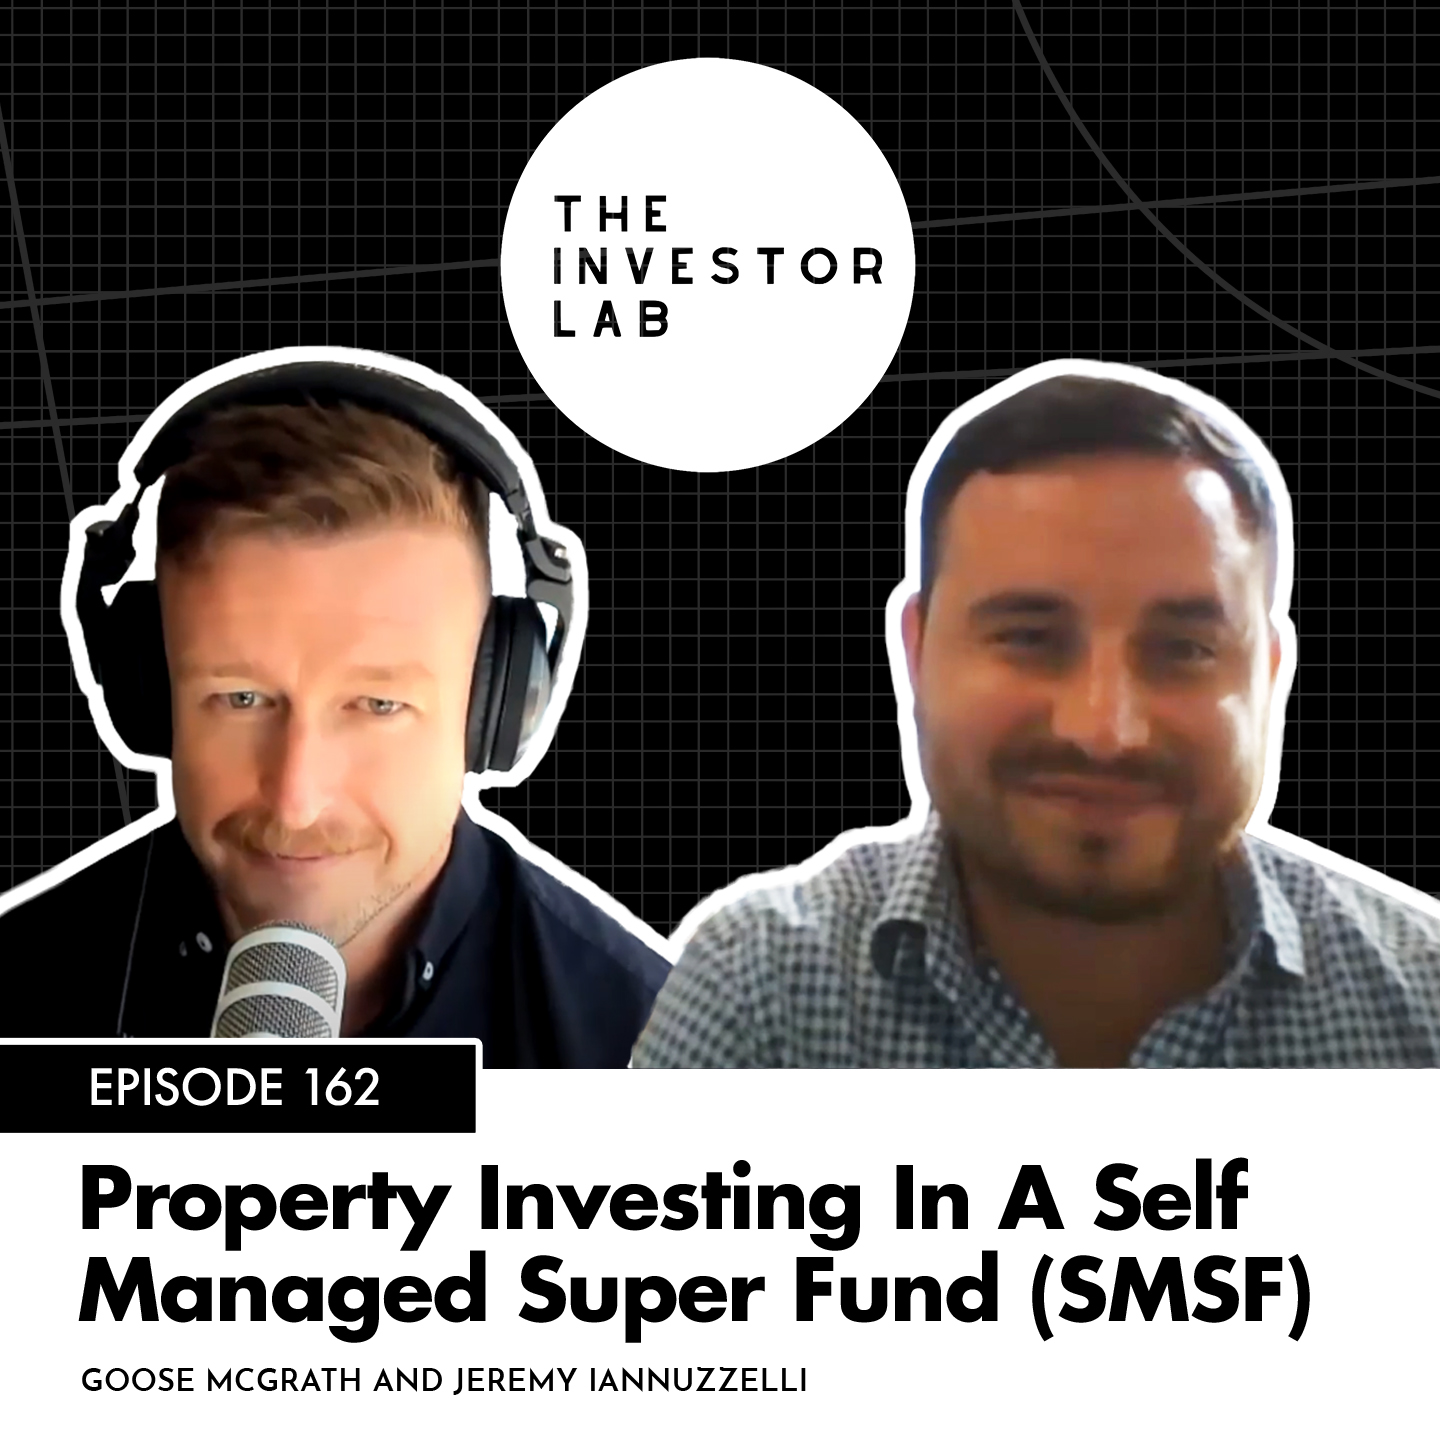 Property Investing In A Self Managed Super Fund (SMSF) with Jeremy Iannuzzelli